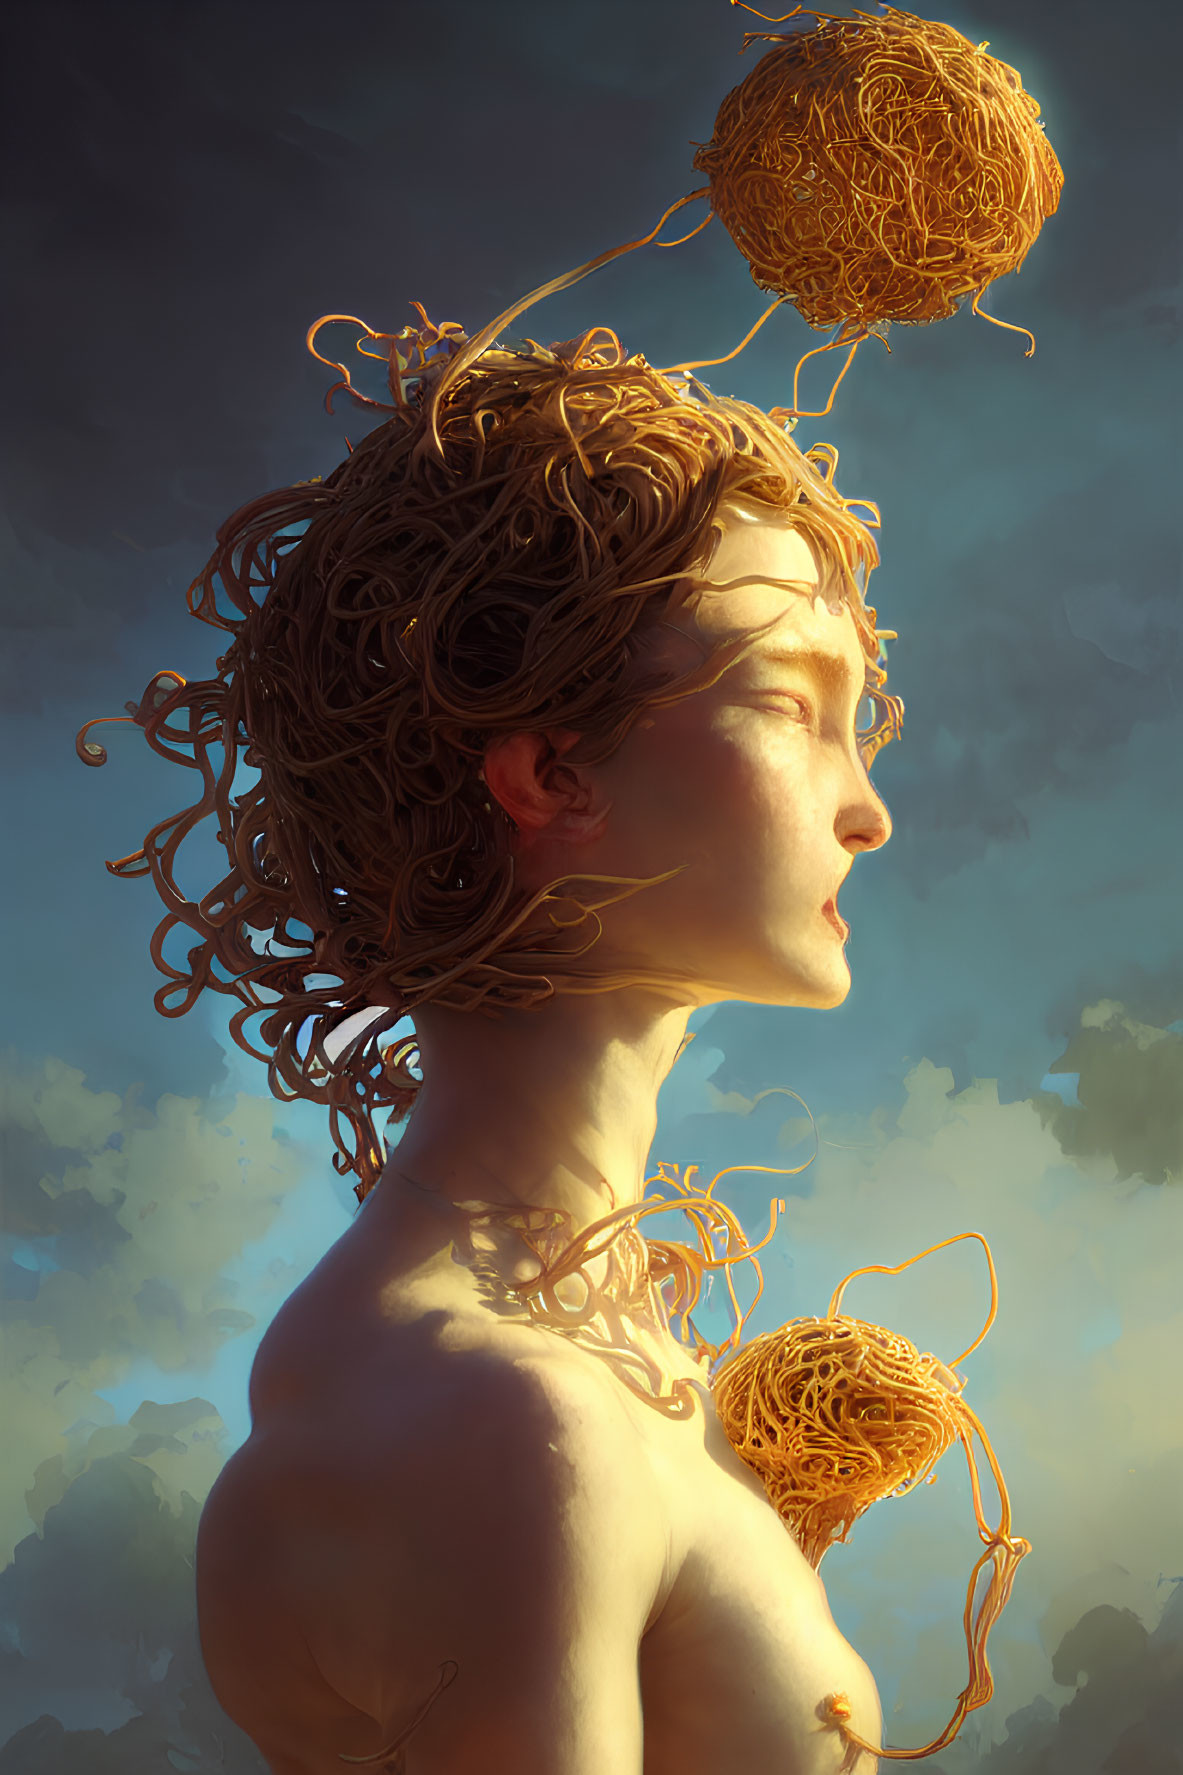 Digital artwork featuring person with curly hair and abstract thread-like elements.